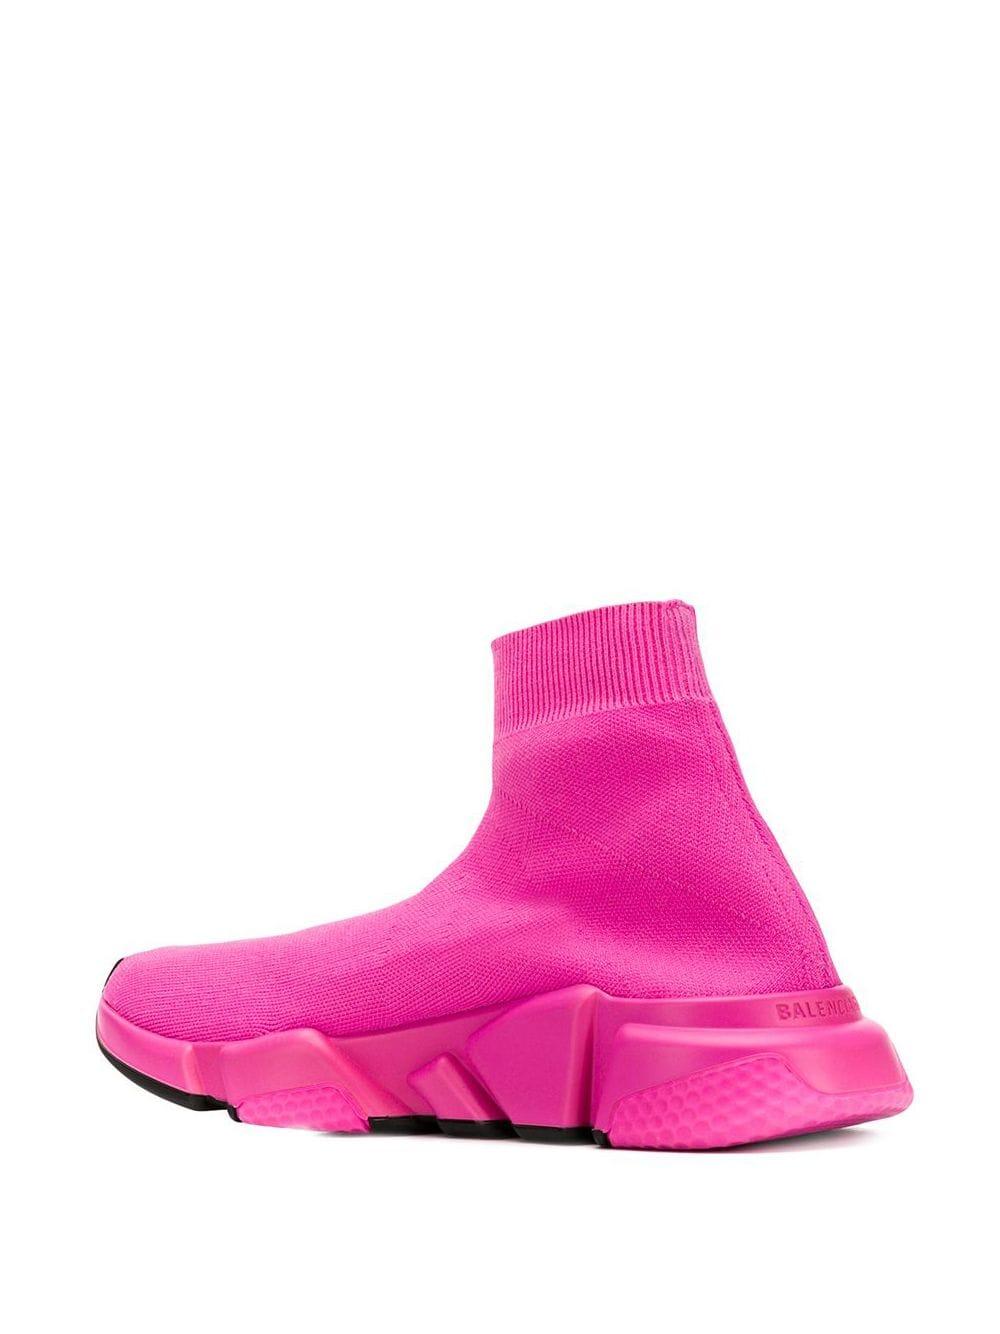 Balenciaga Rubber Exclusive To Farfetch - Speed Sock Sneakers in Pink ...